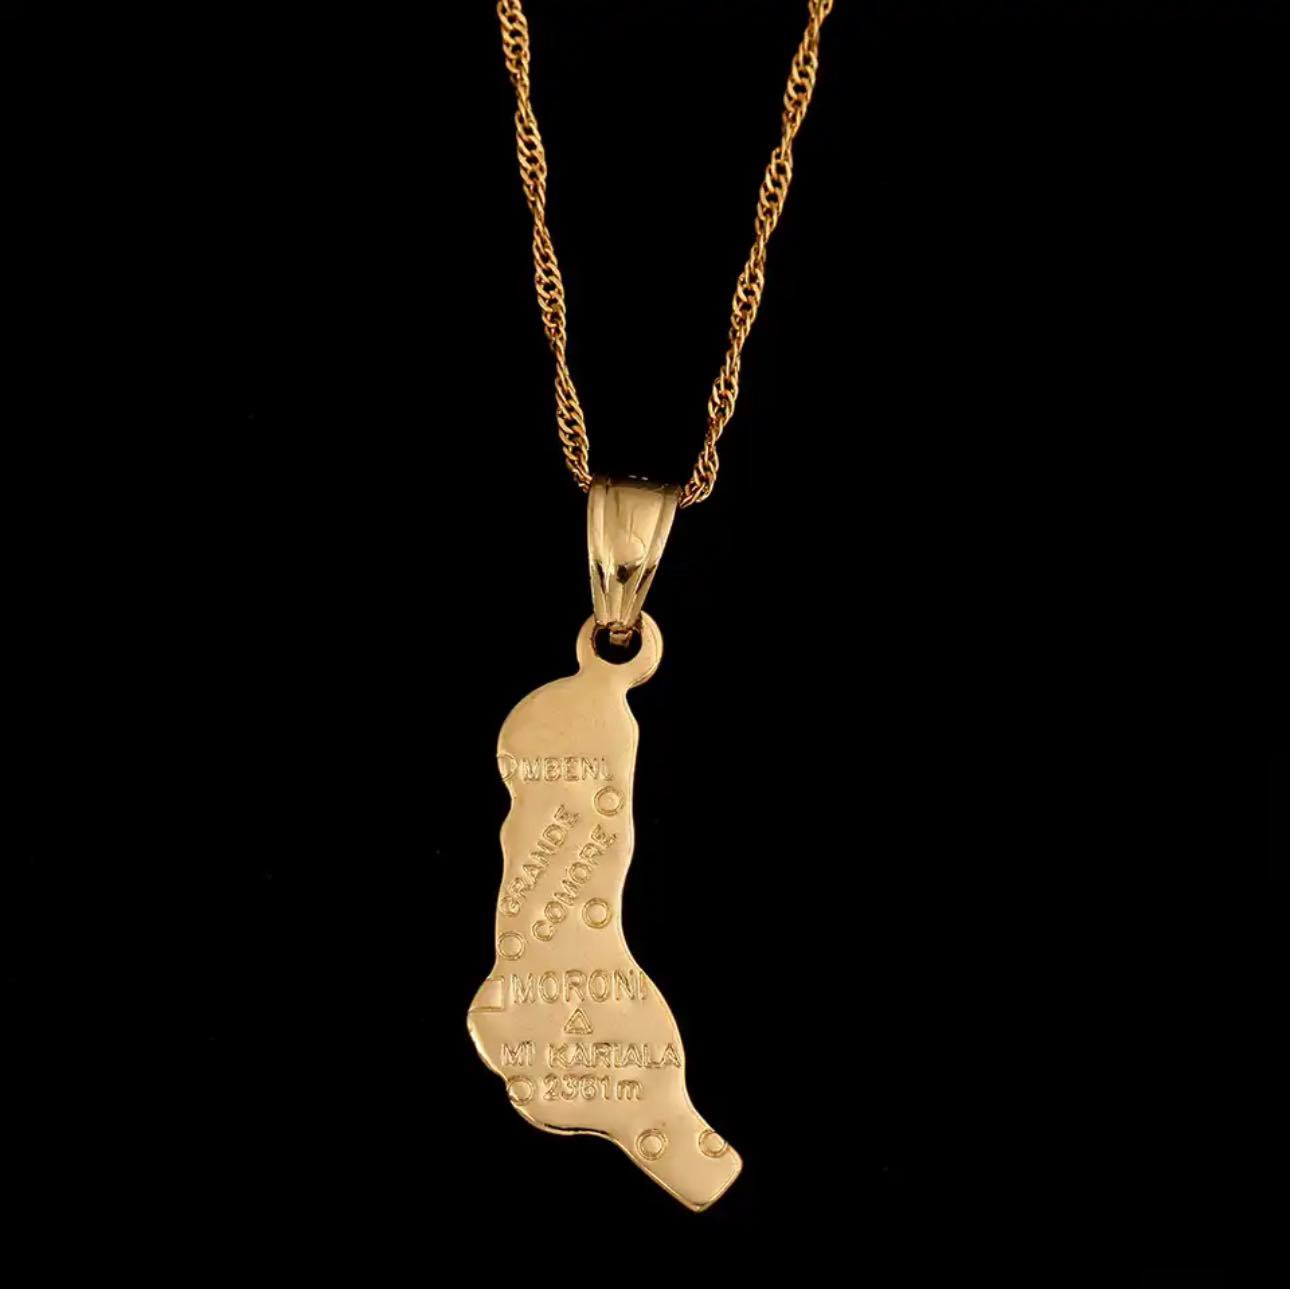 The Gambia Map & Cities Necklace